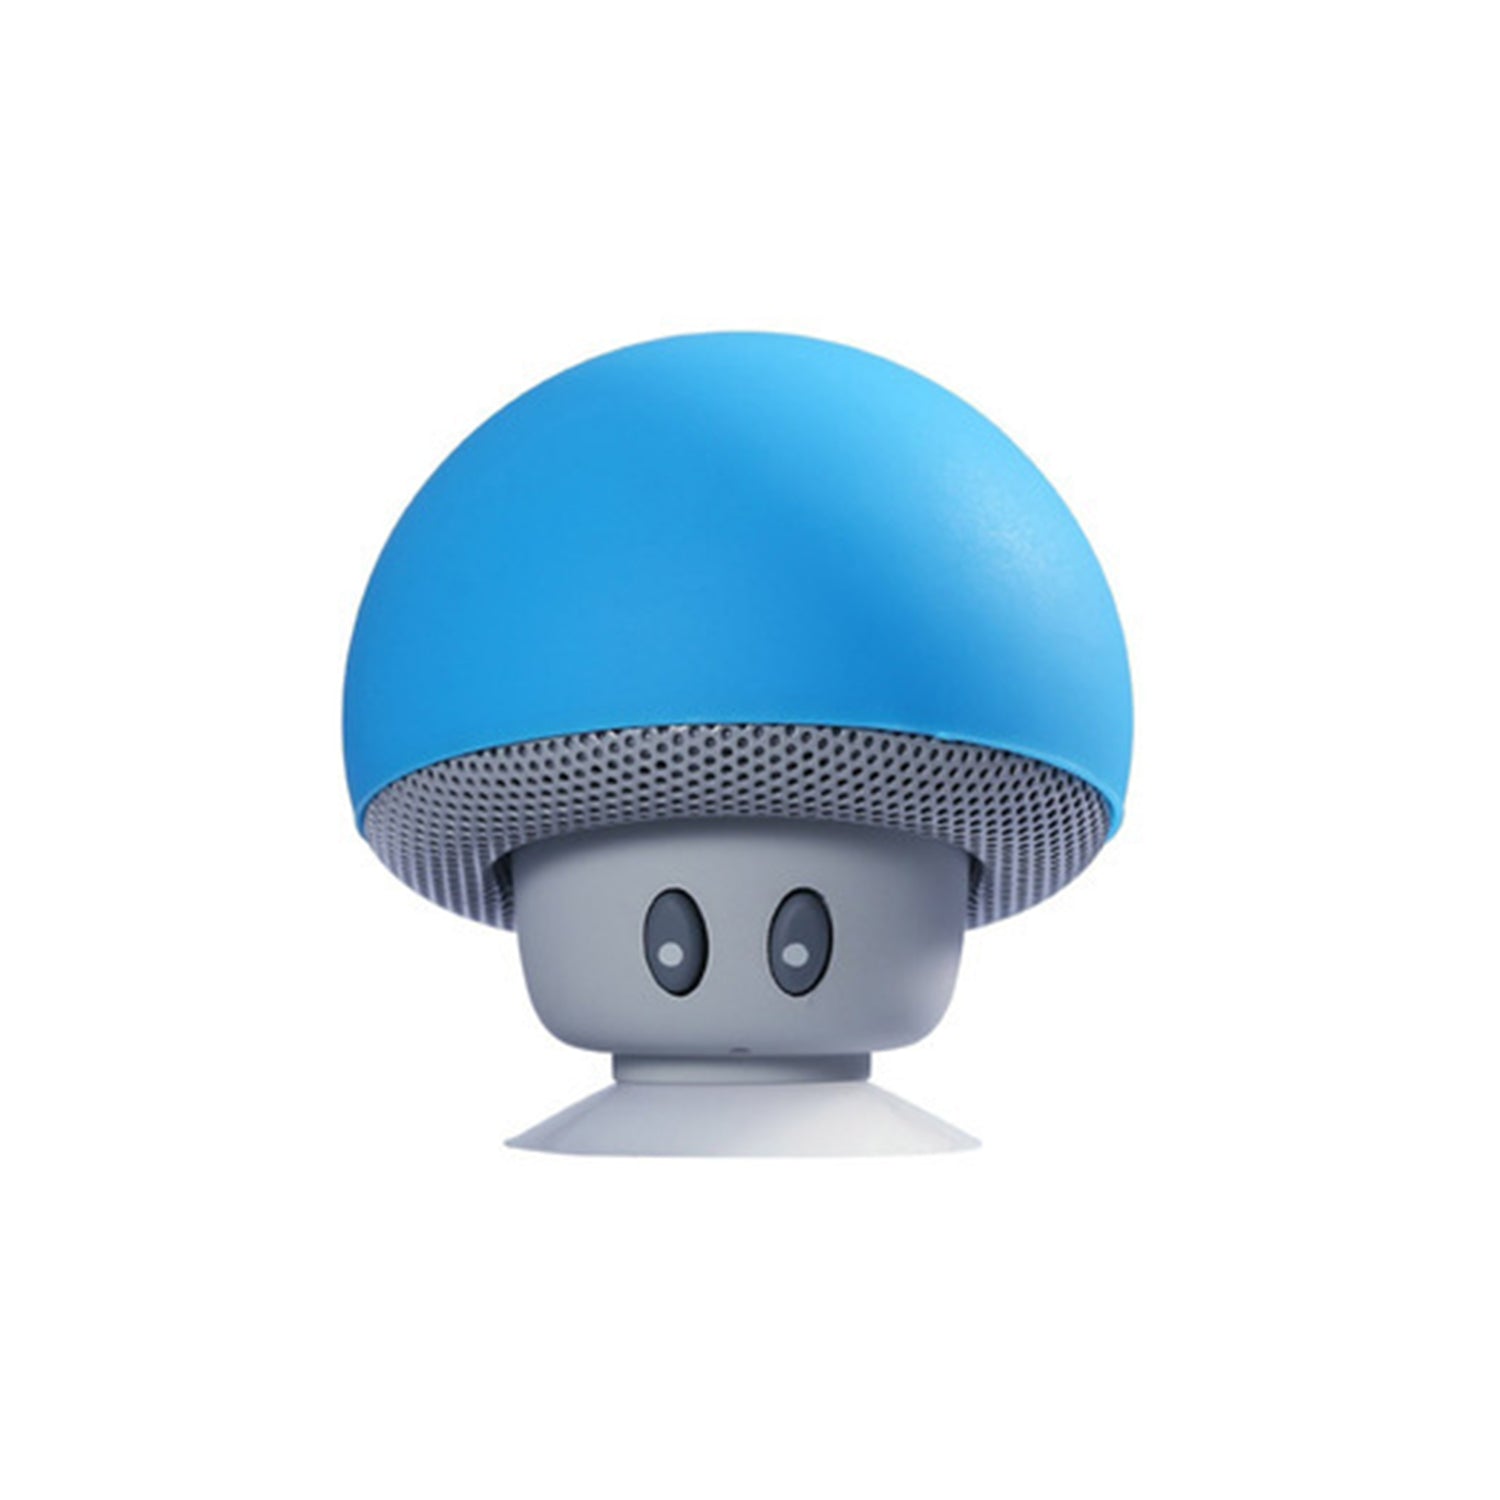 Mini mushroom Bluetooth wireless speaker, which can be used as a mobile phone support